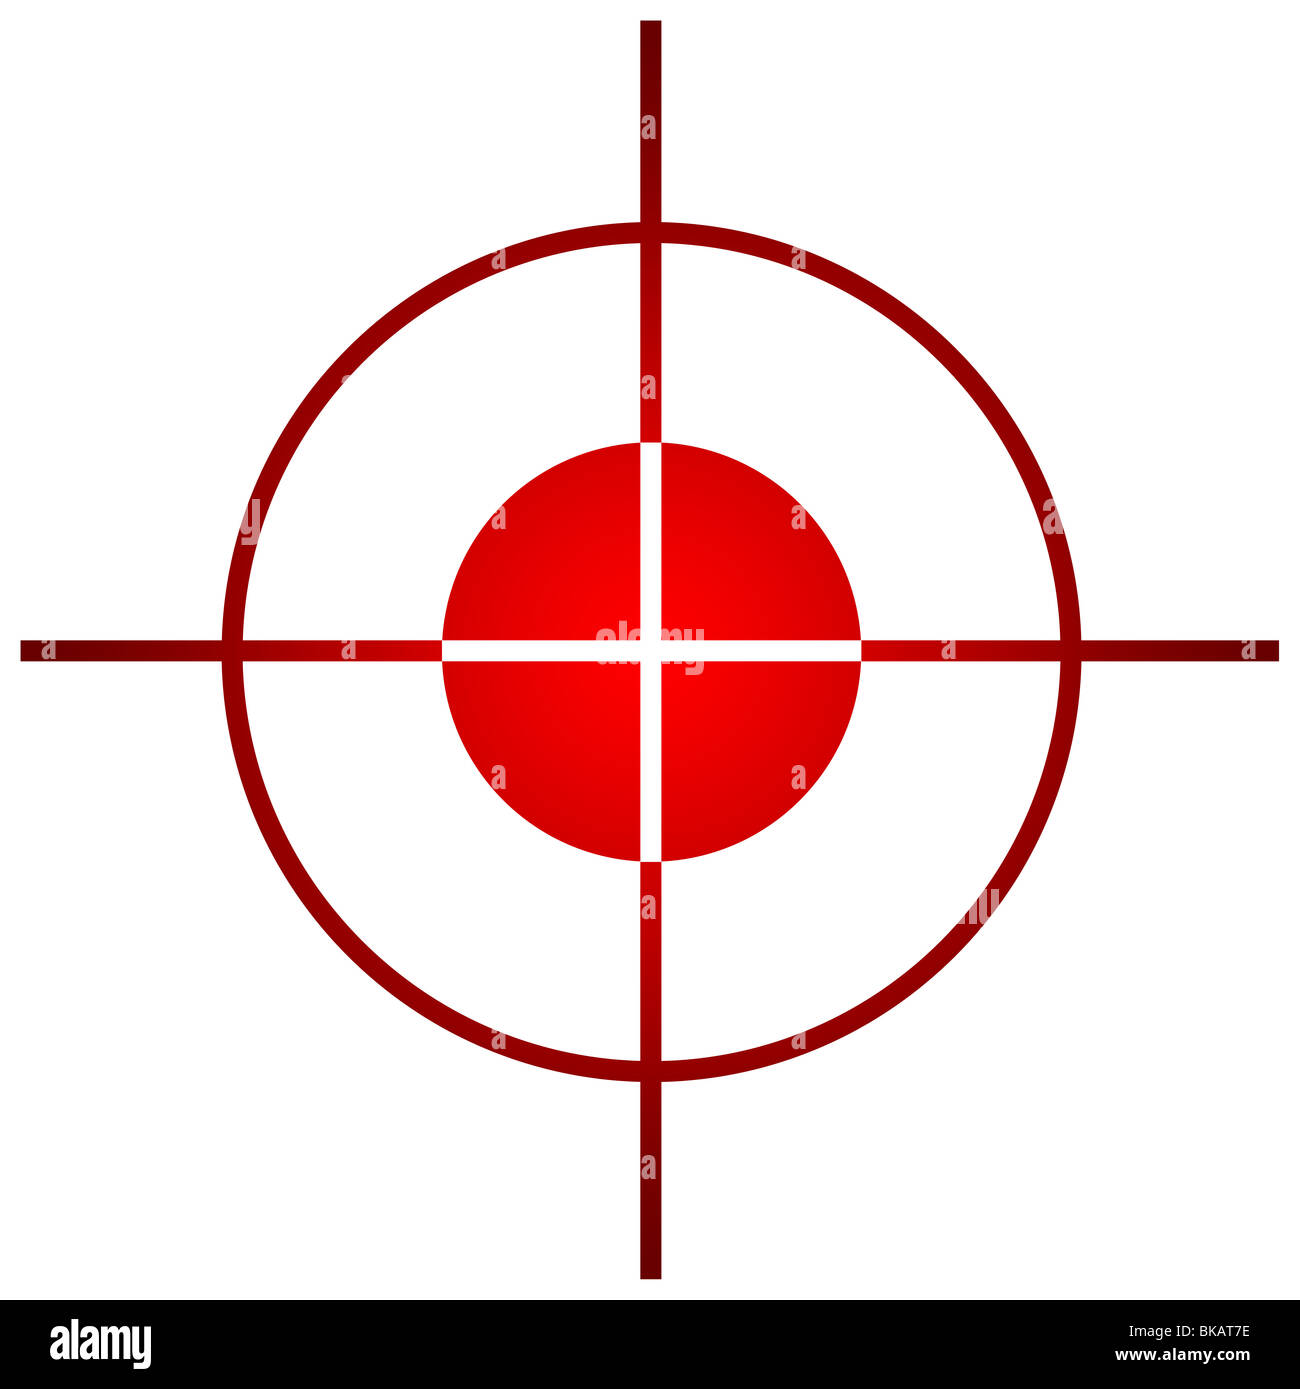 Sniper target scope or sight, isolated on white background. Stock Photo